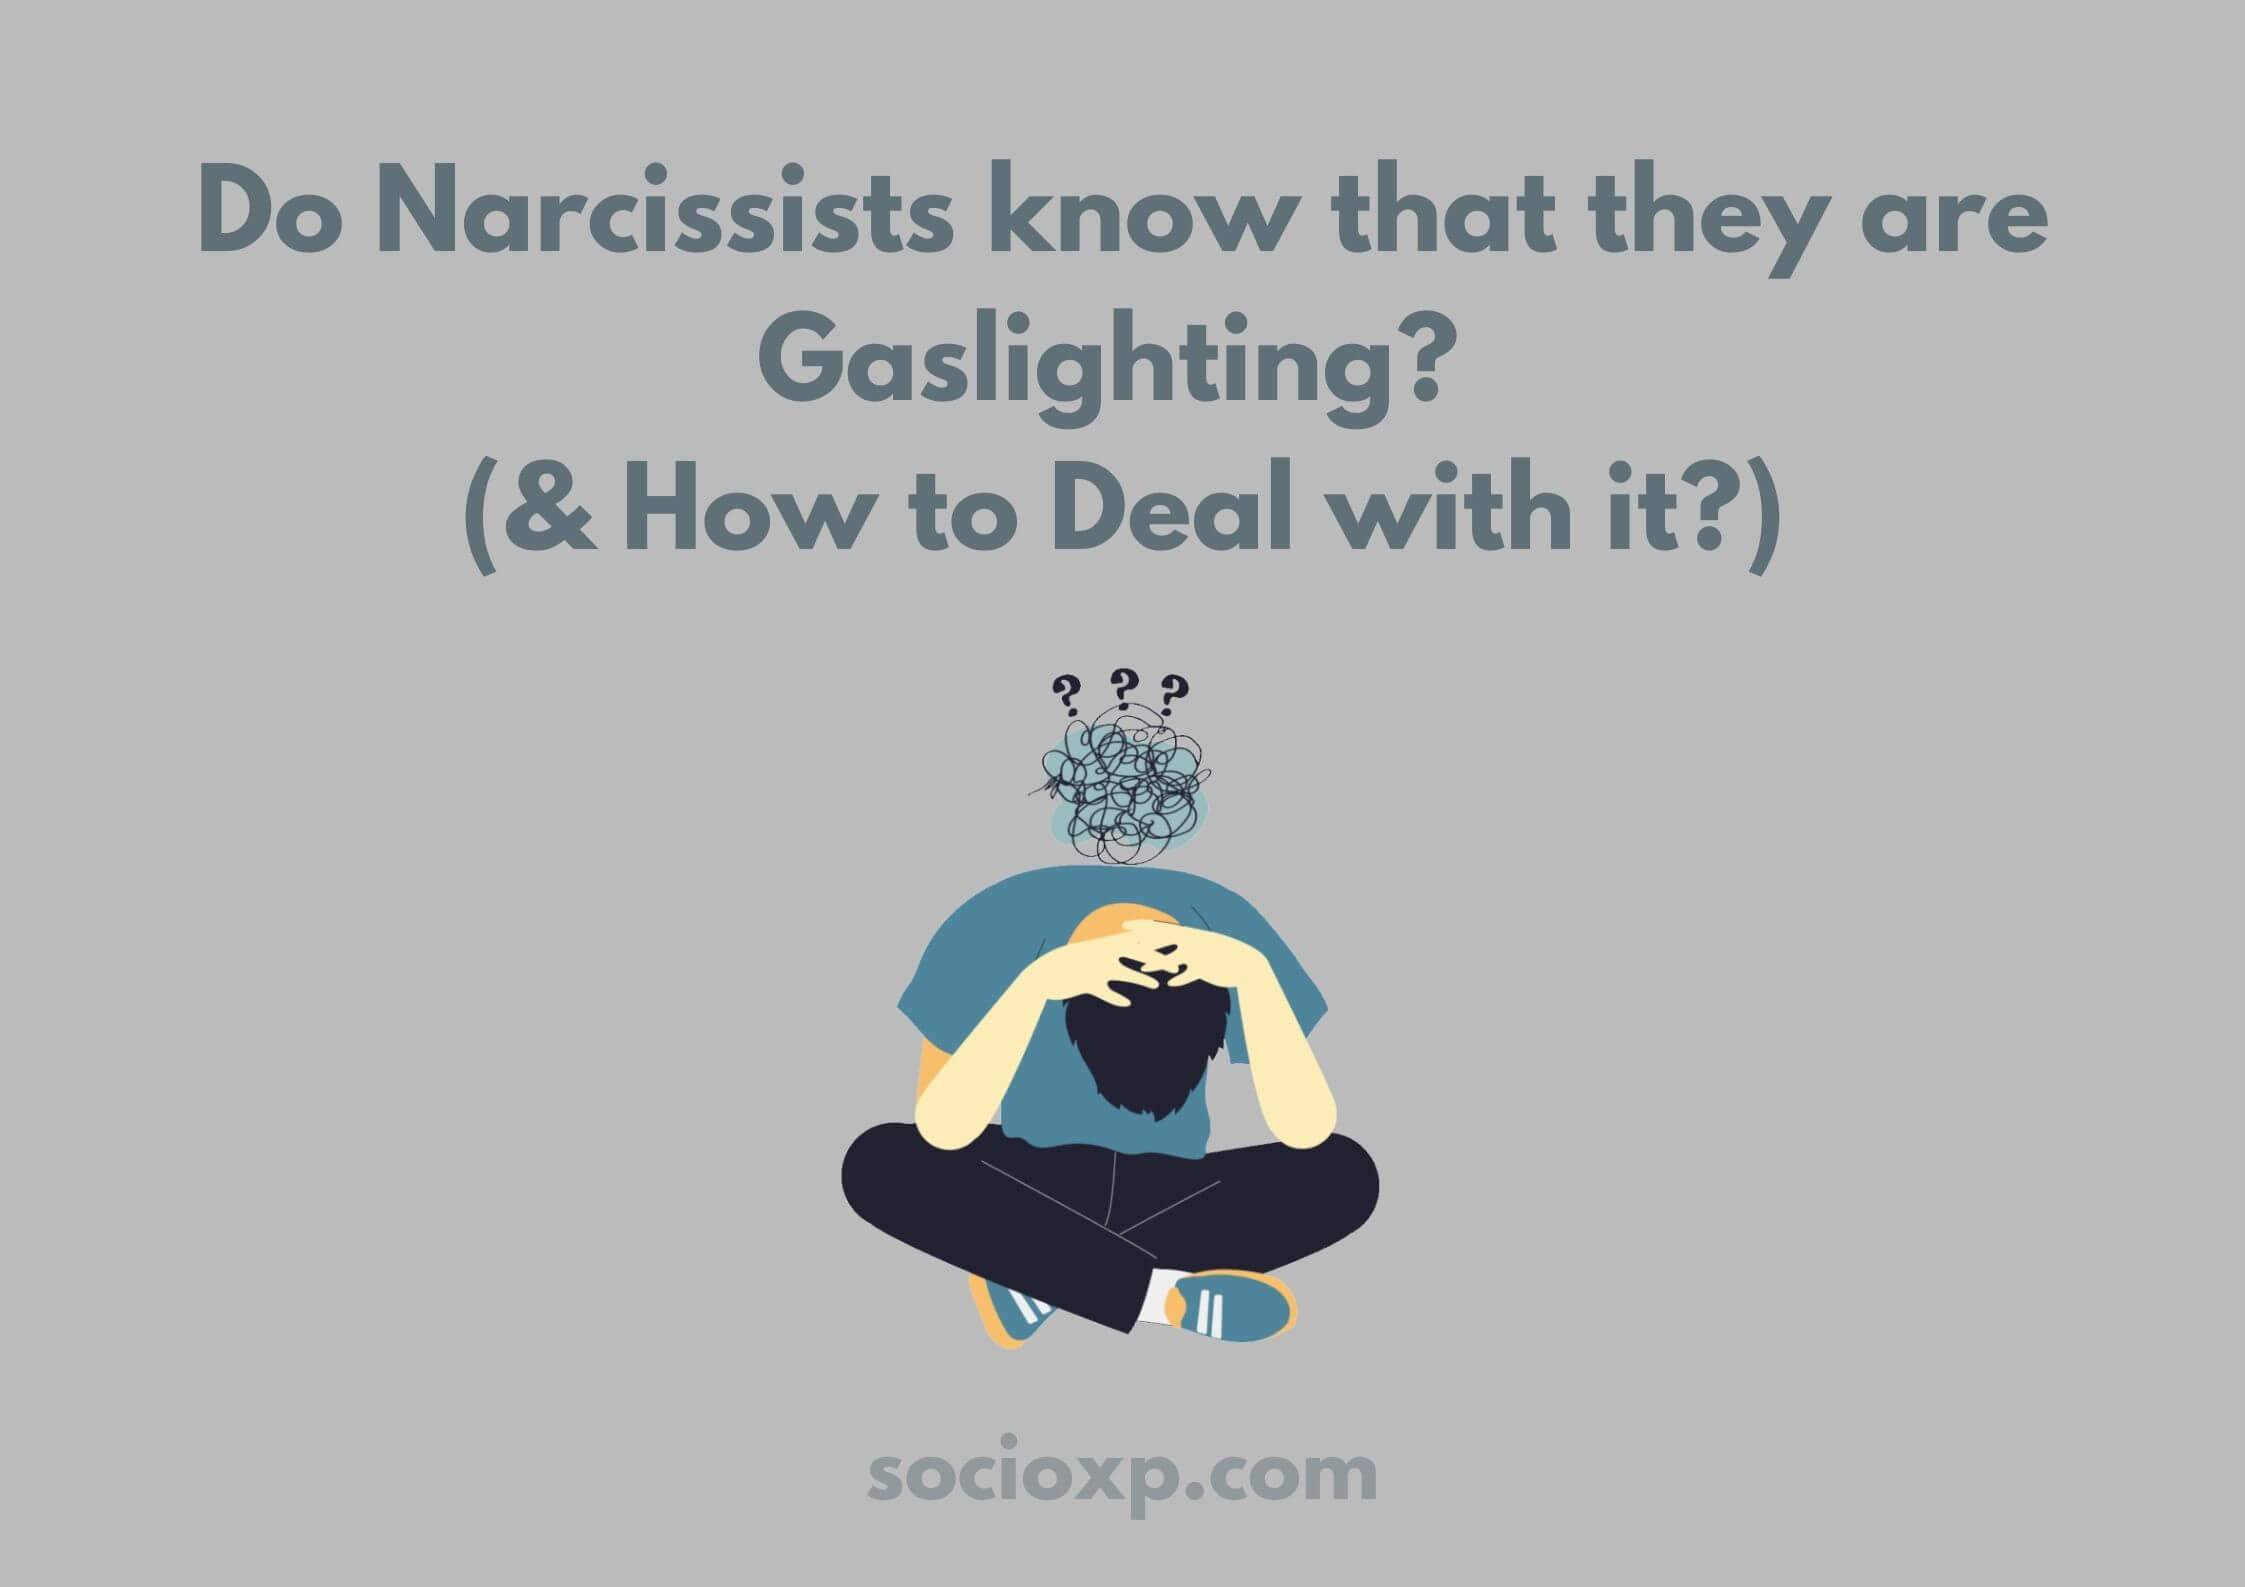 Do Narcissists Know That They are Gaslighting? (& How to Deal with it?)